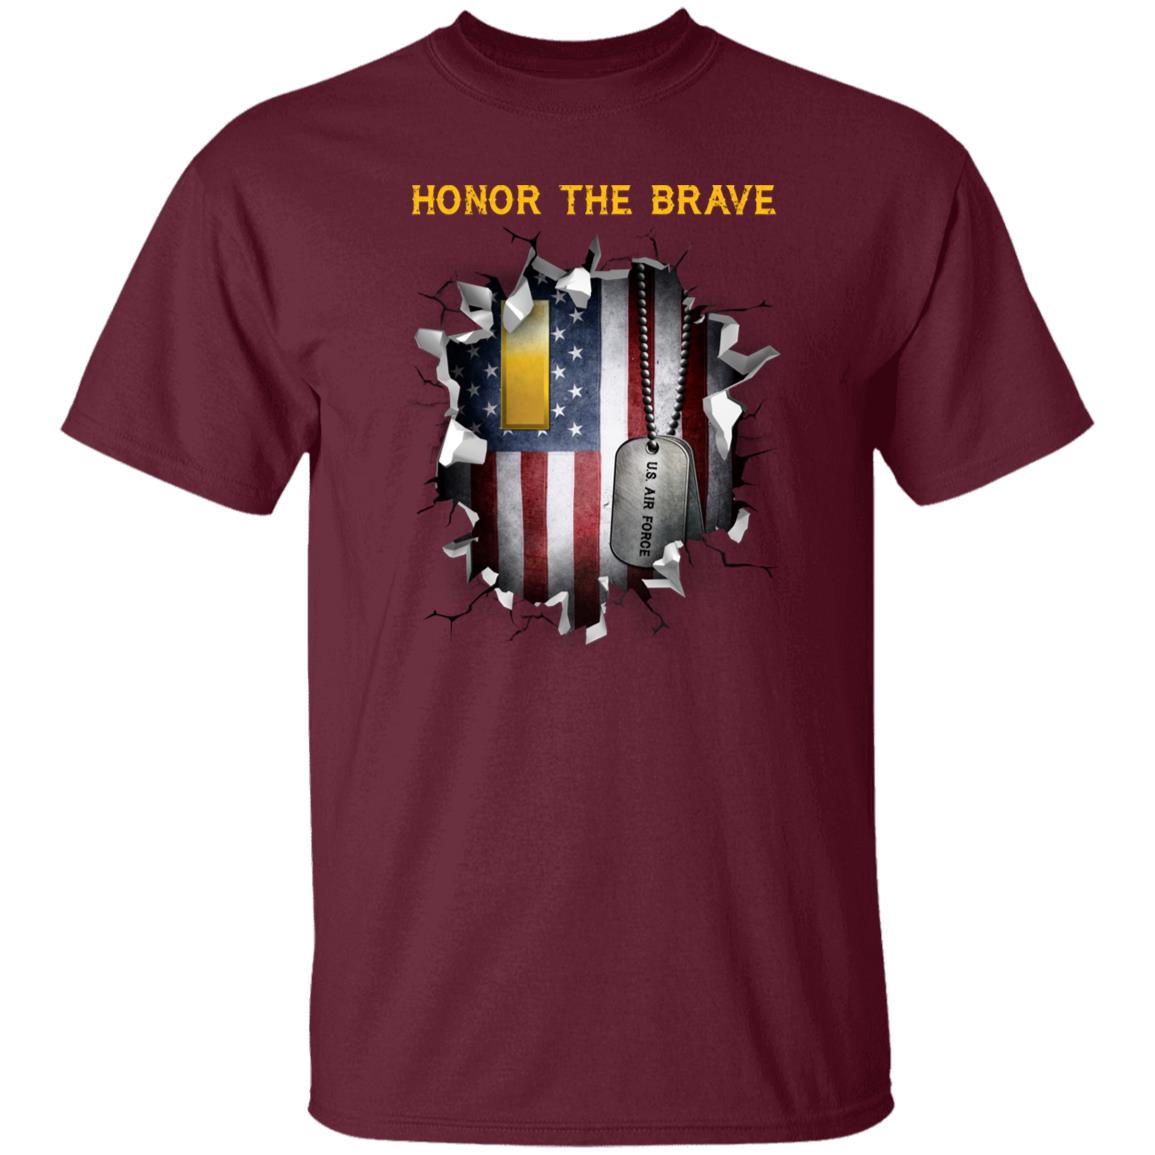 US Air Force O-1 Second Lieutenant 2d Lt O1 Commissioned Officer  - Honor The Brave - Honor The Brave Front Shirt